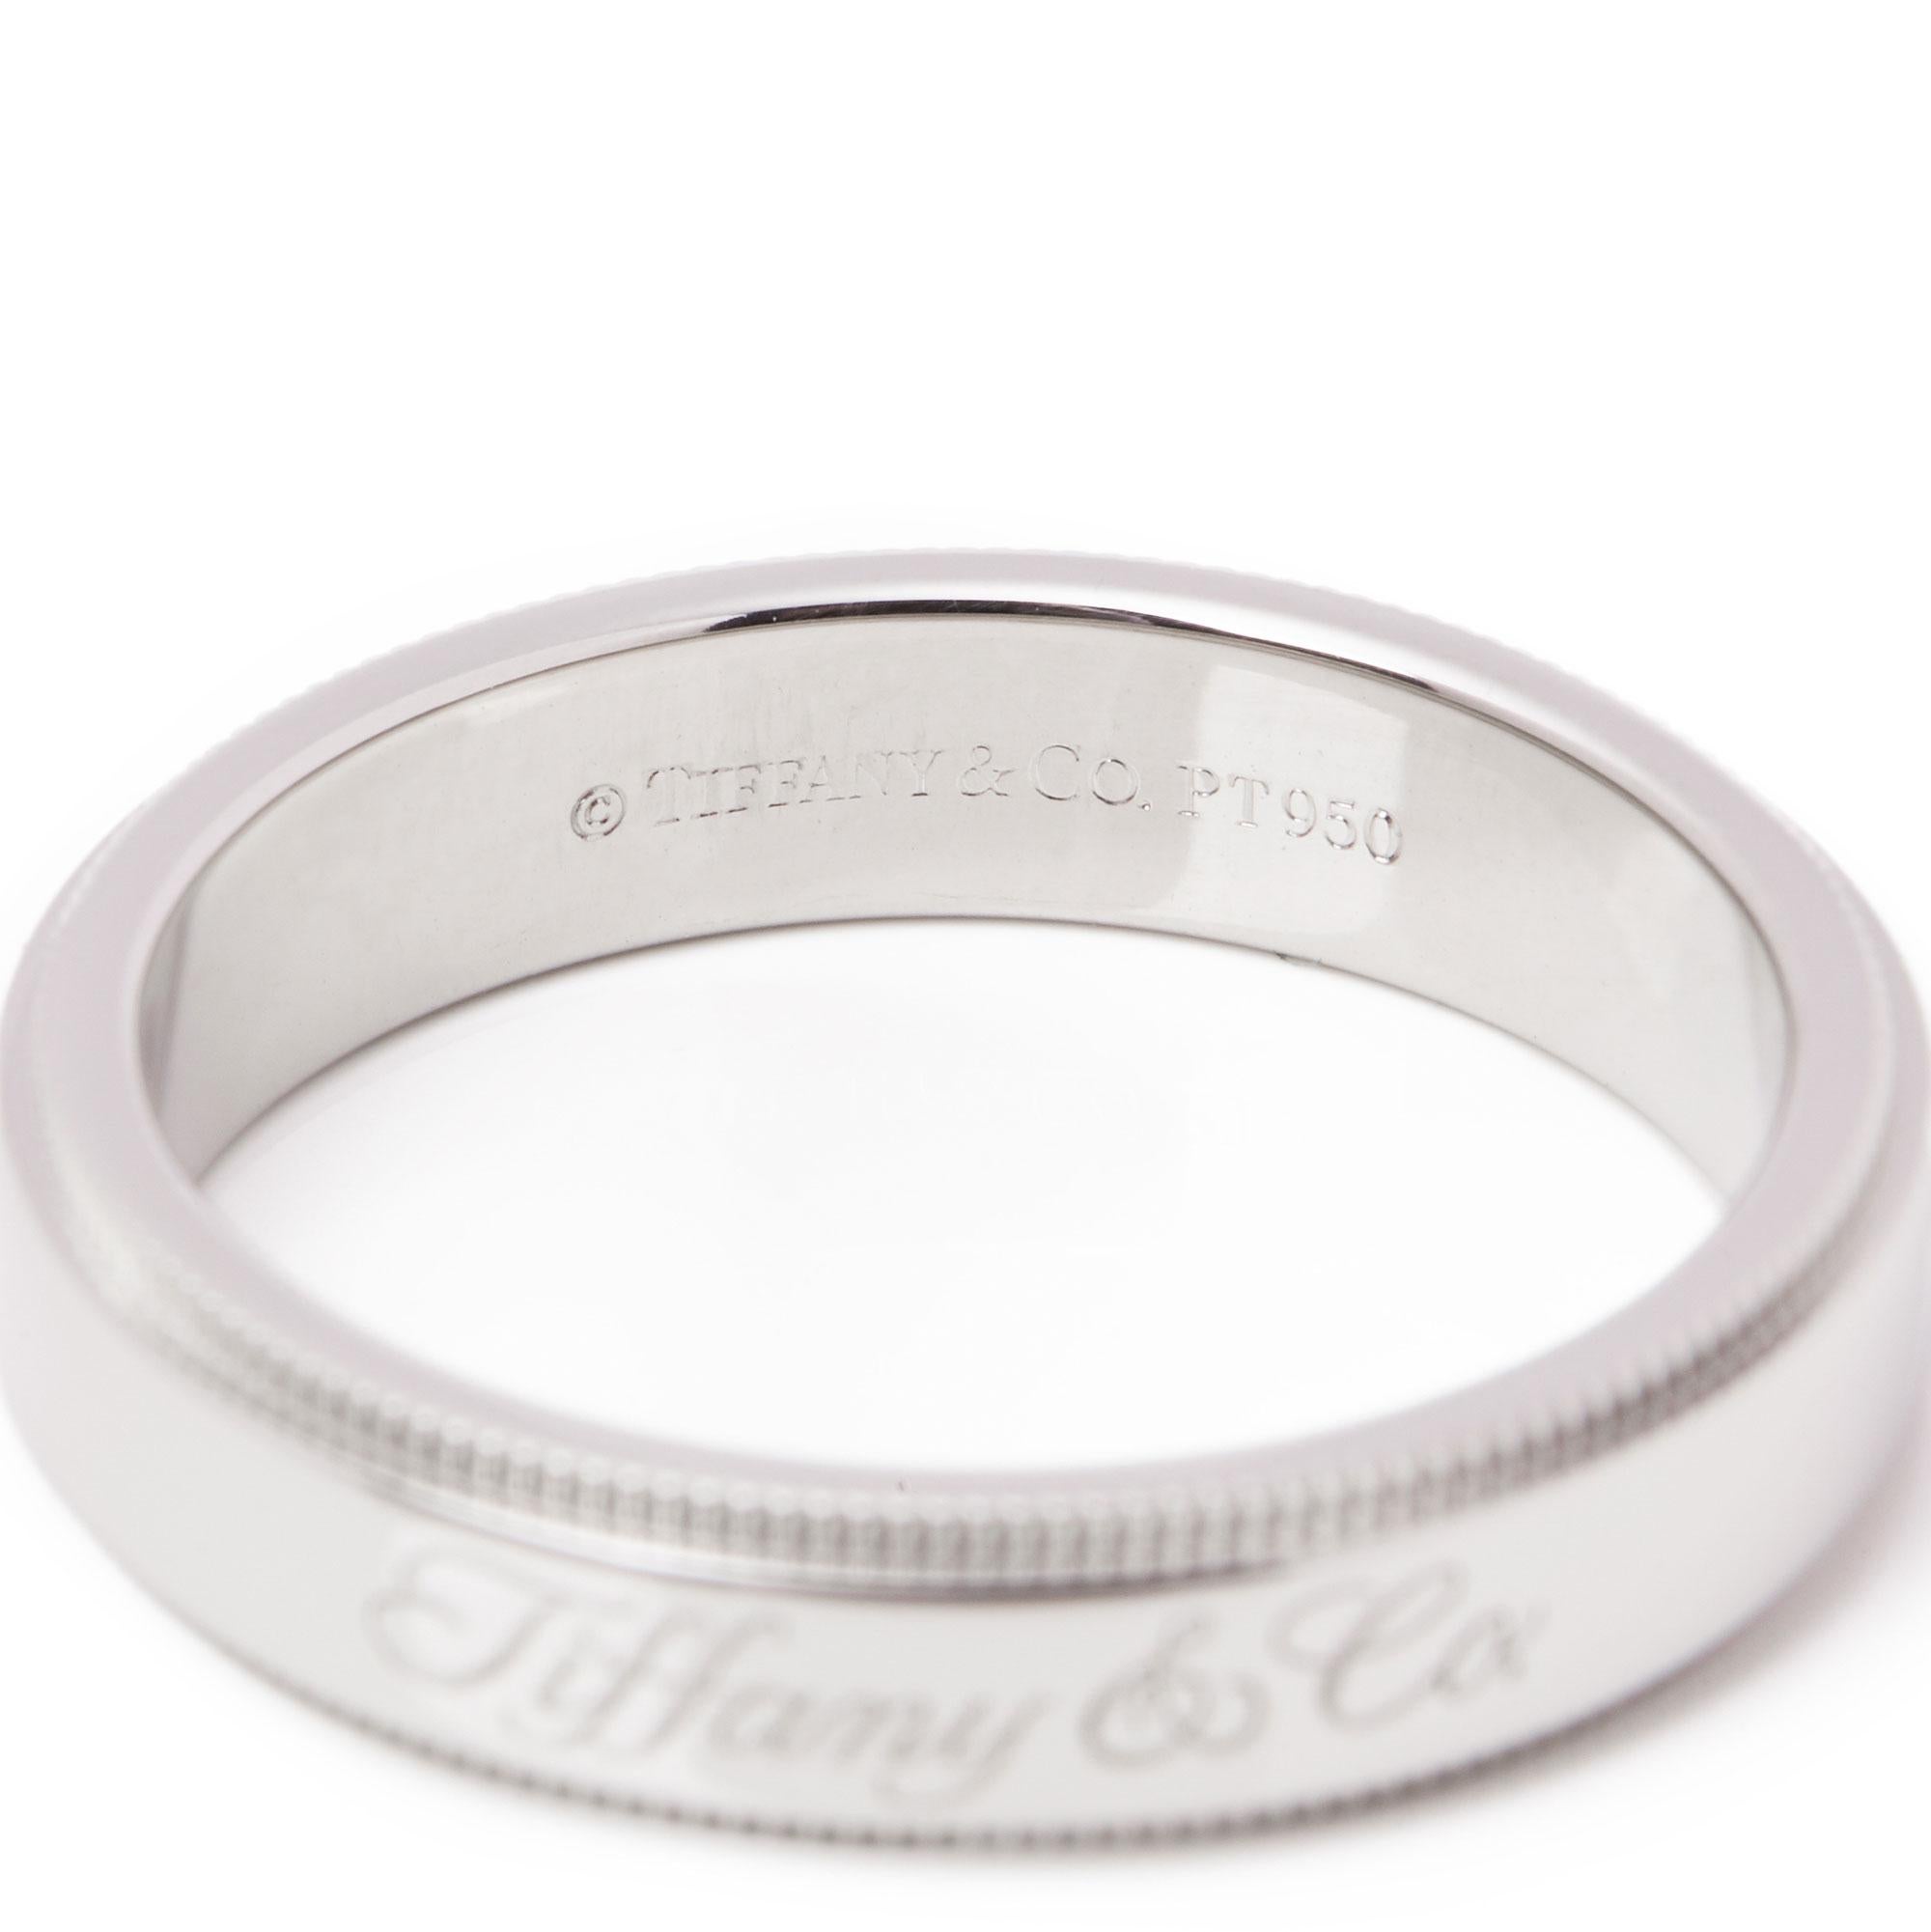 tiffany and co notes ring